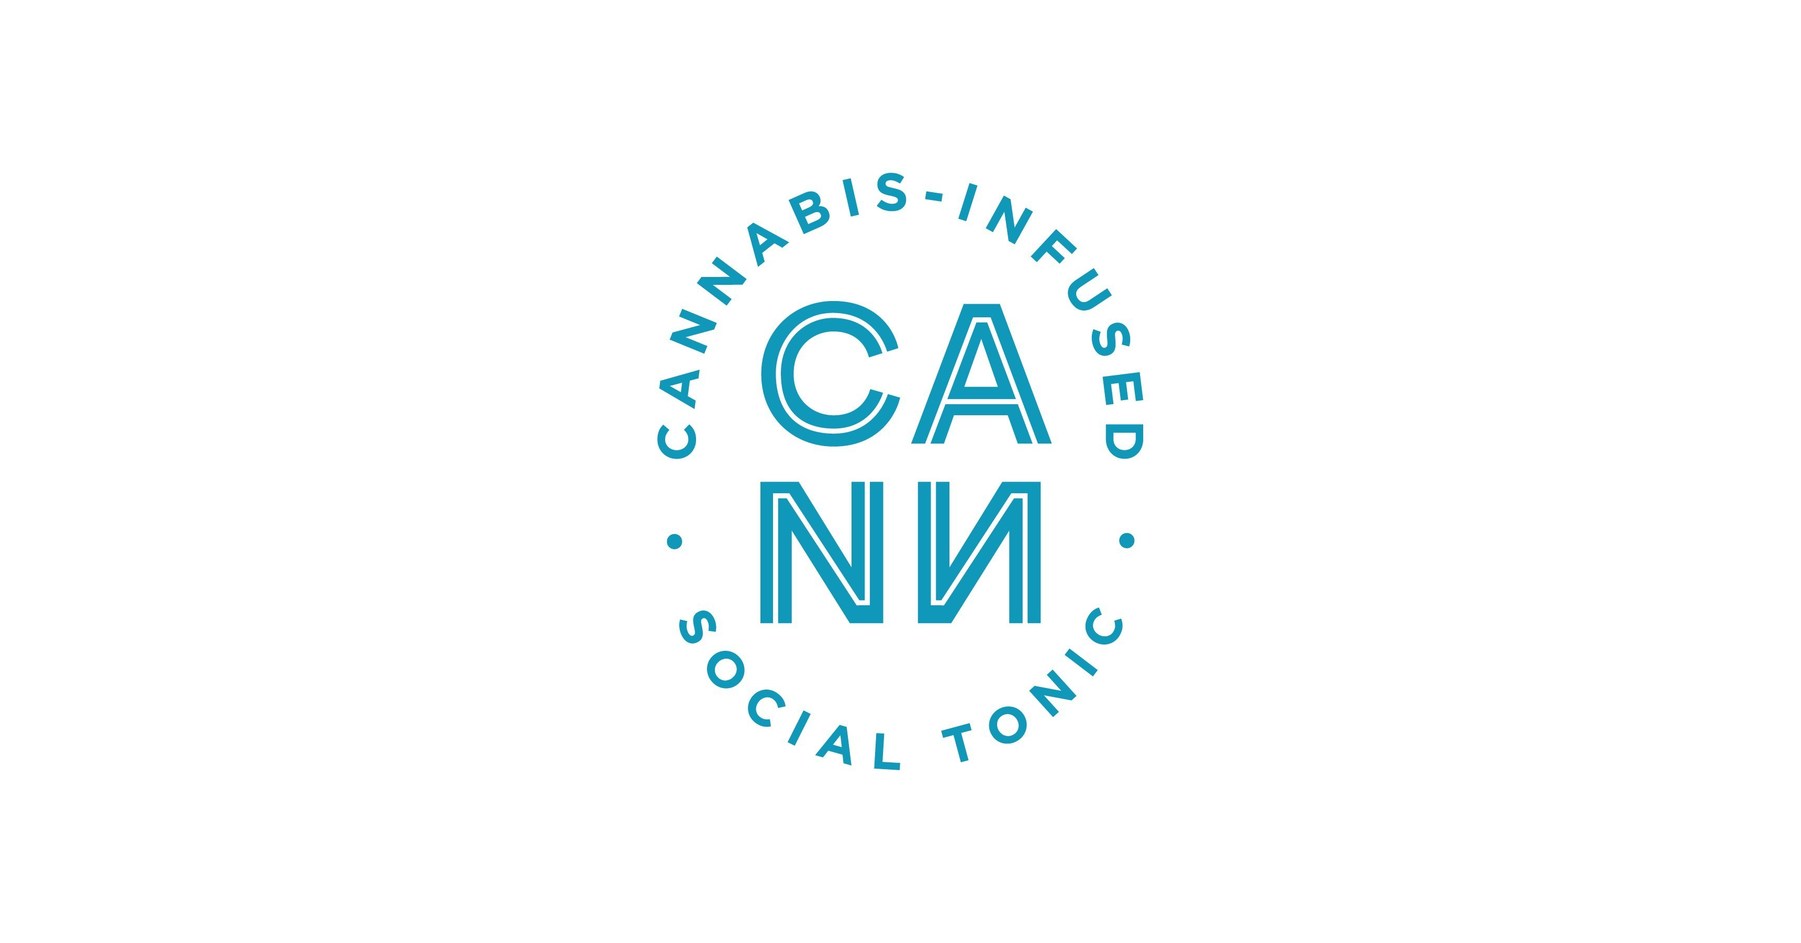 Cann Social Tonics Sweep the CLIO Cannabis Awards with 15 Wins, Including Brand-of-the-Year